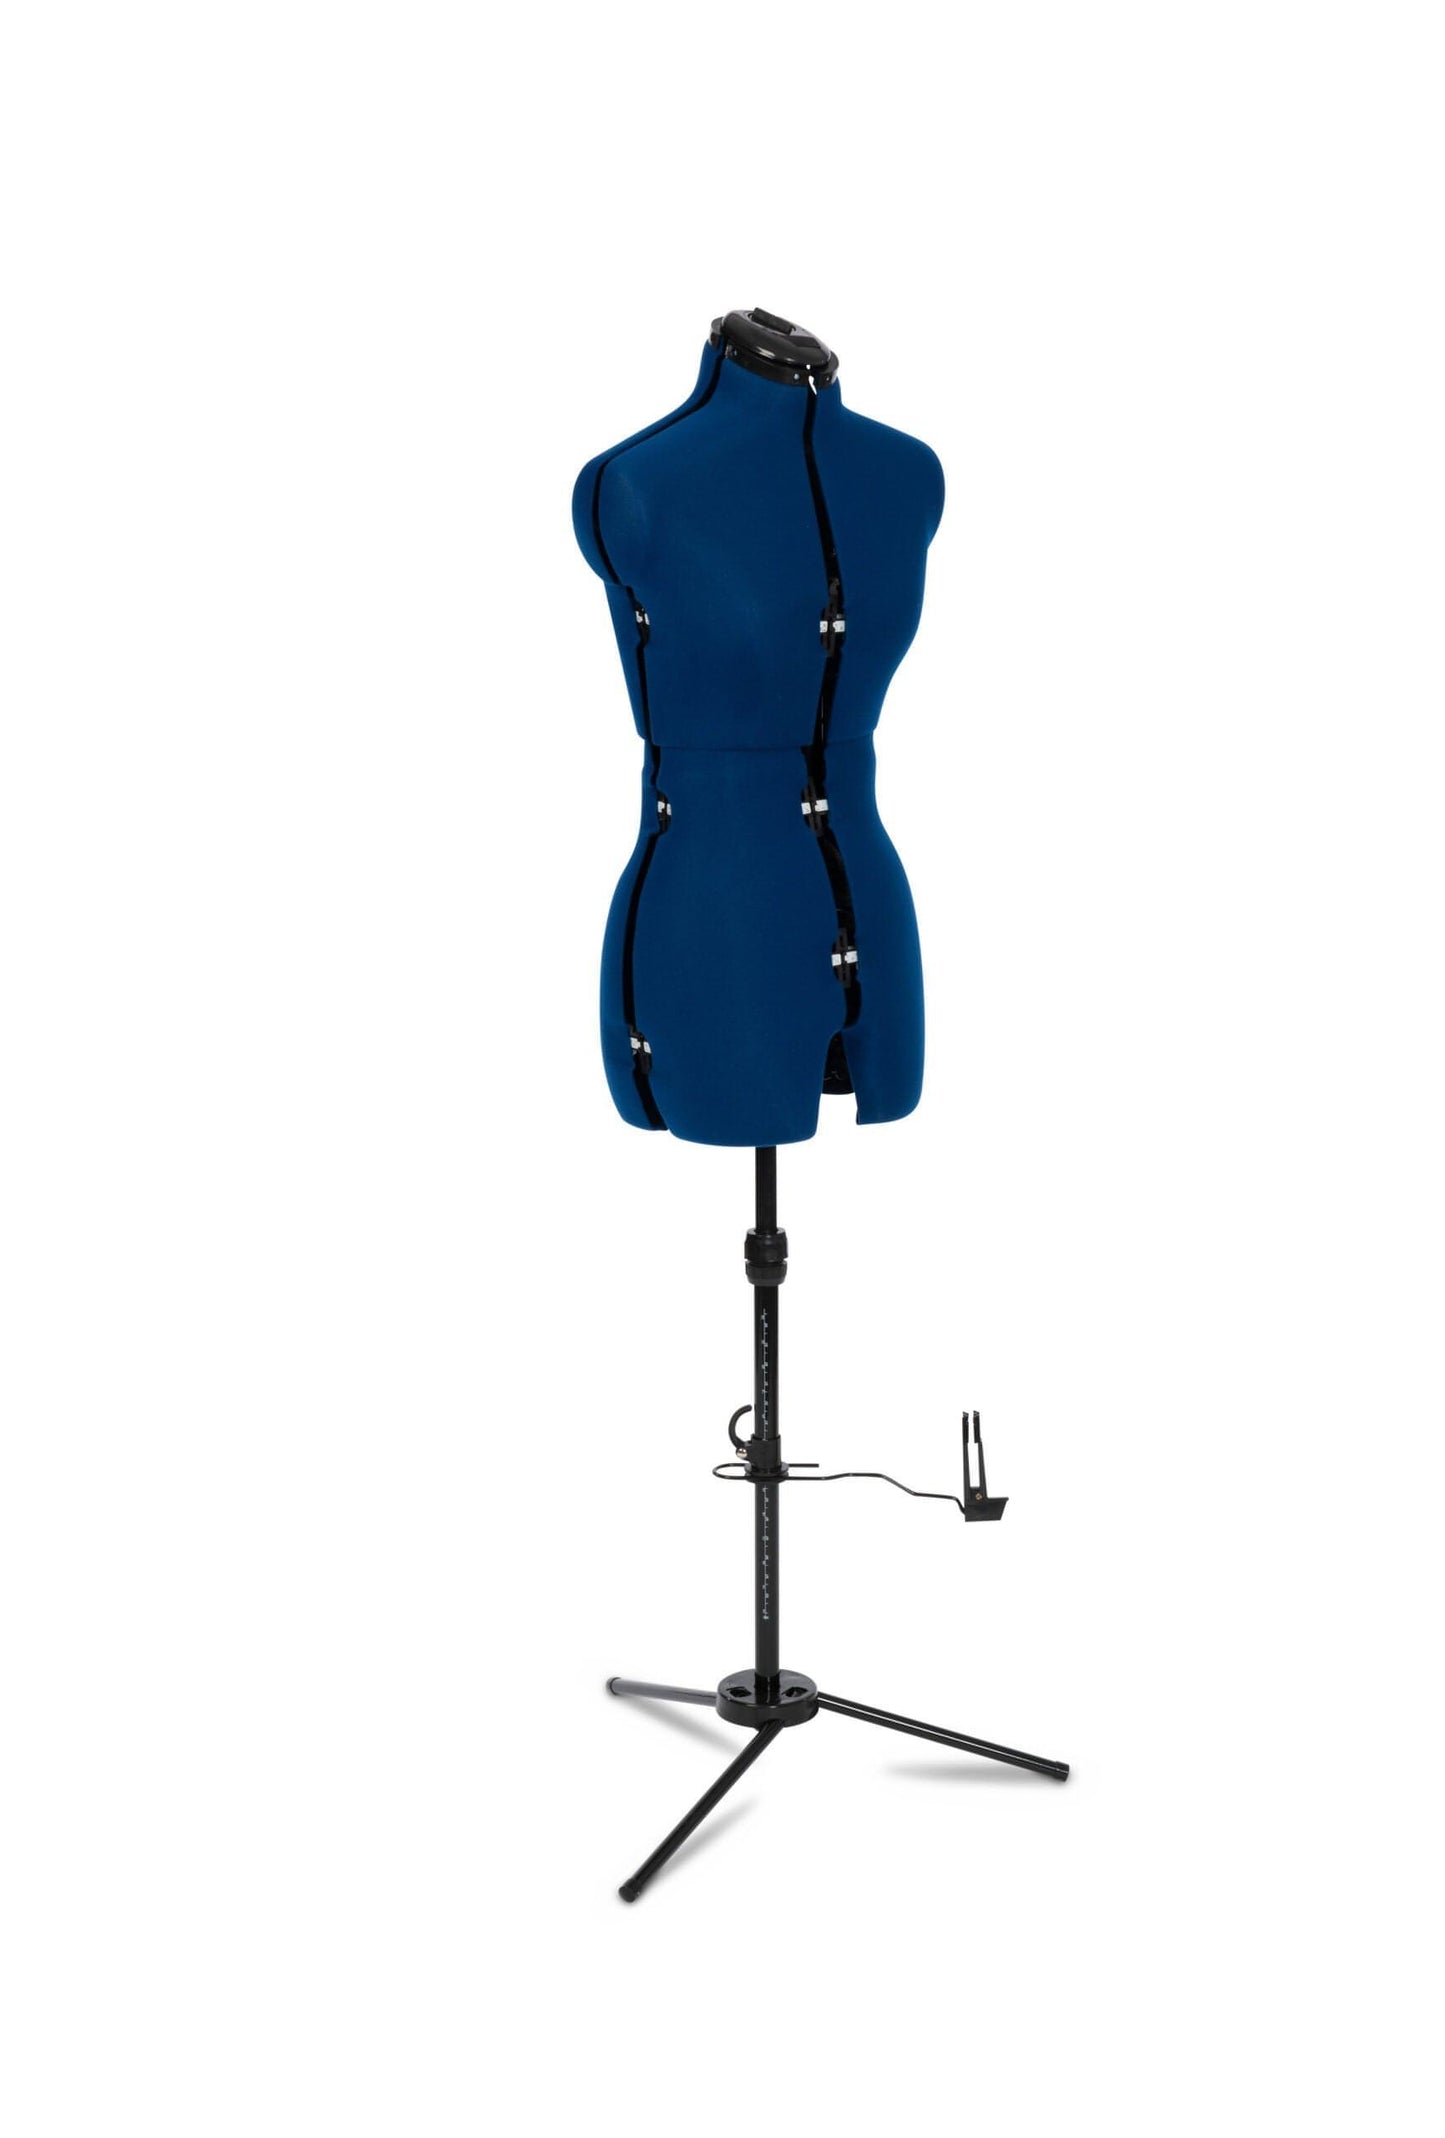 Adjustoform * made in the UK * Sew Deluxe Dress Form (Sapphire Blue)  12 adjusters - Small Ex Display